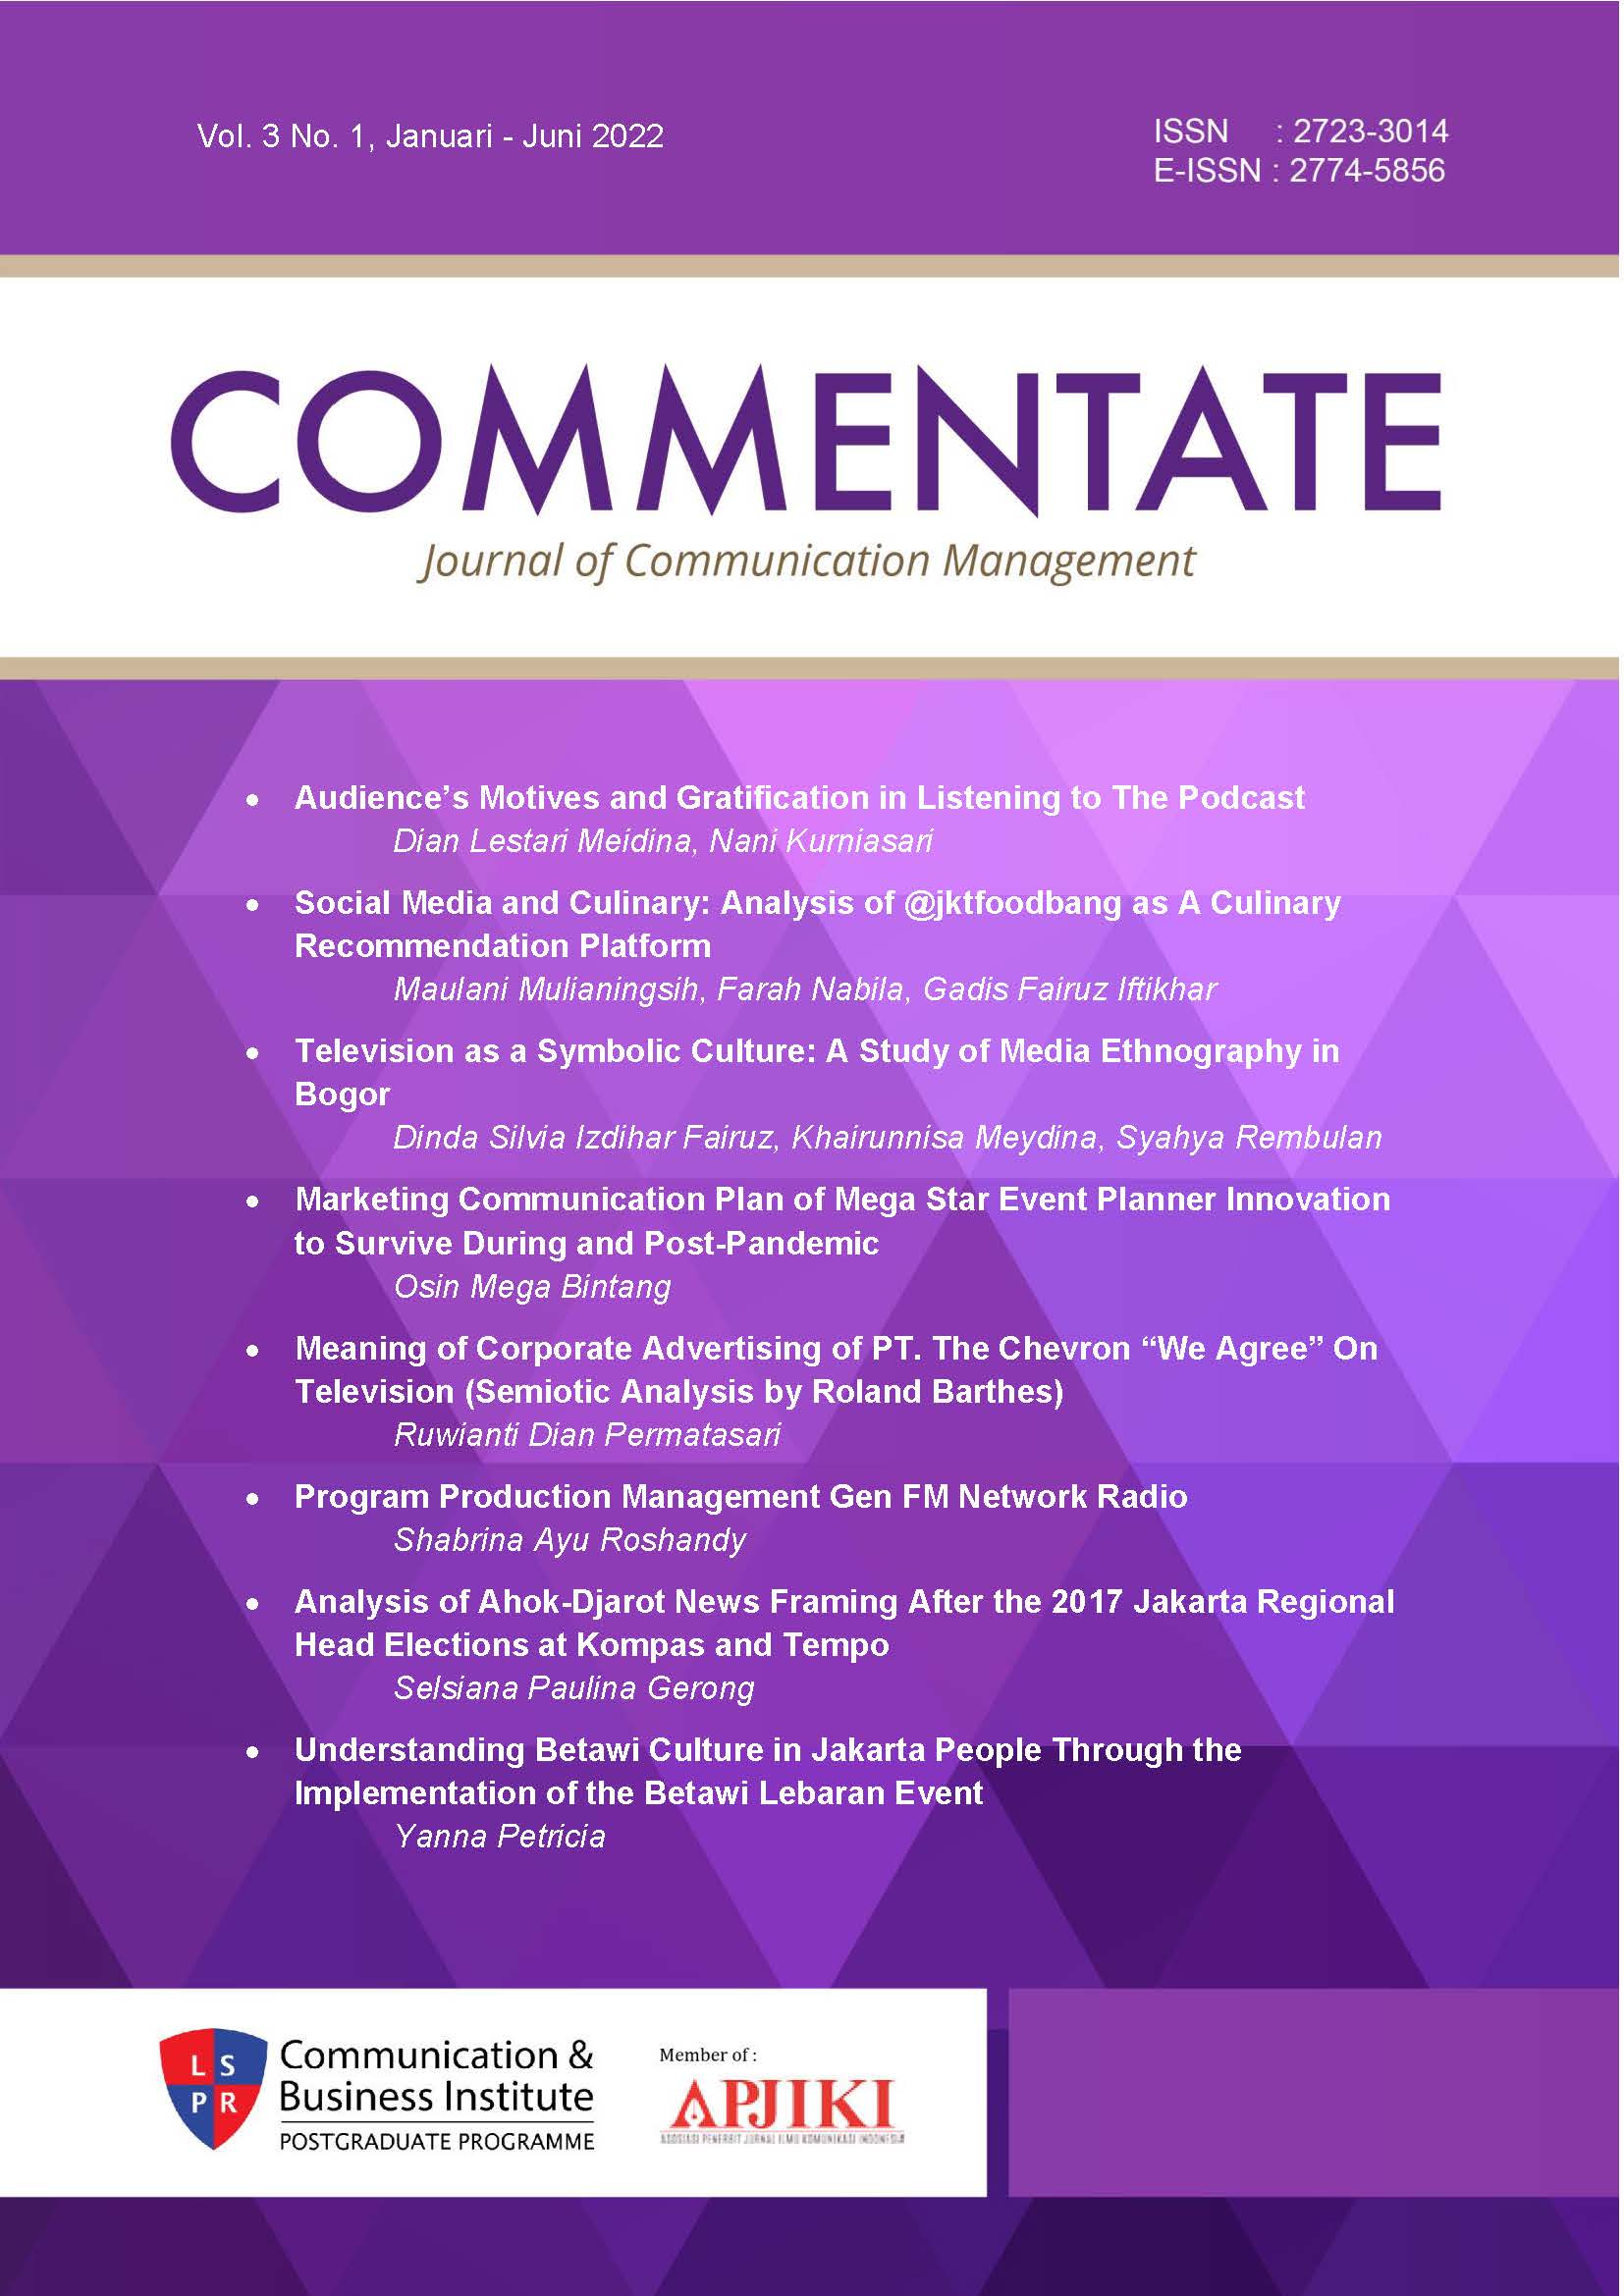 					View Vol. 3 No. 1 (2022): COMMENTATE: Journal of Communication Management
				